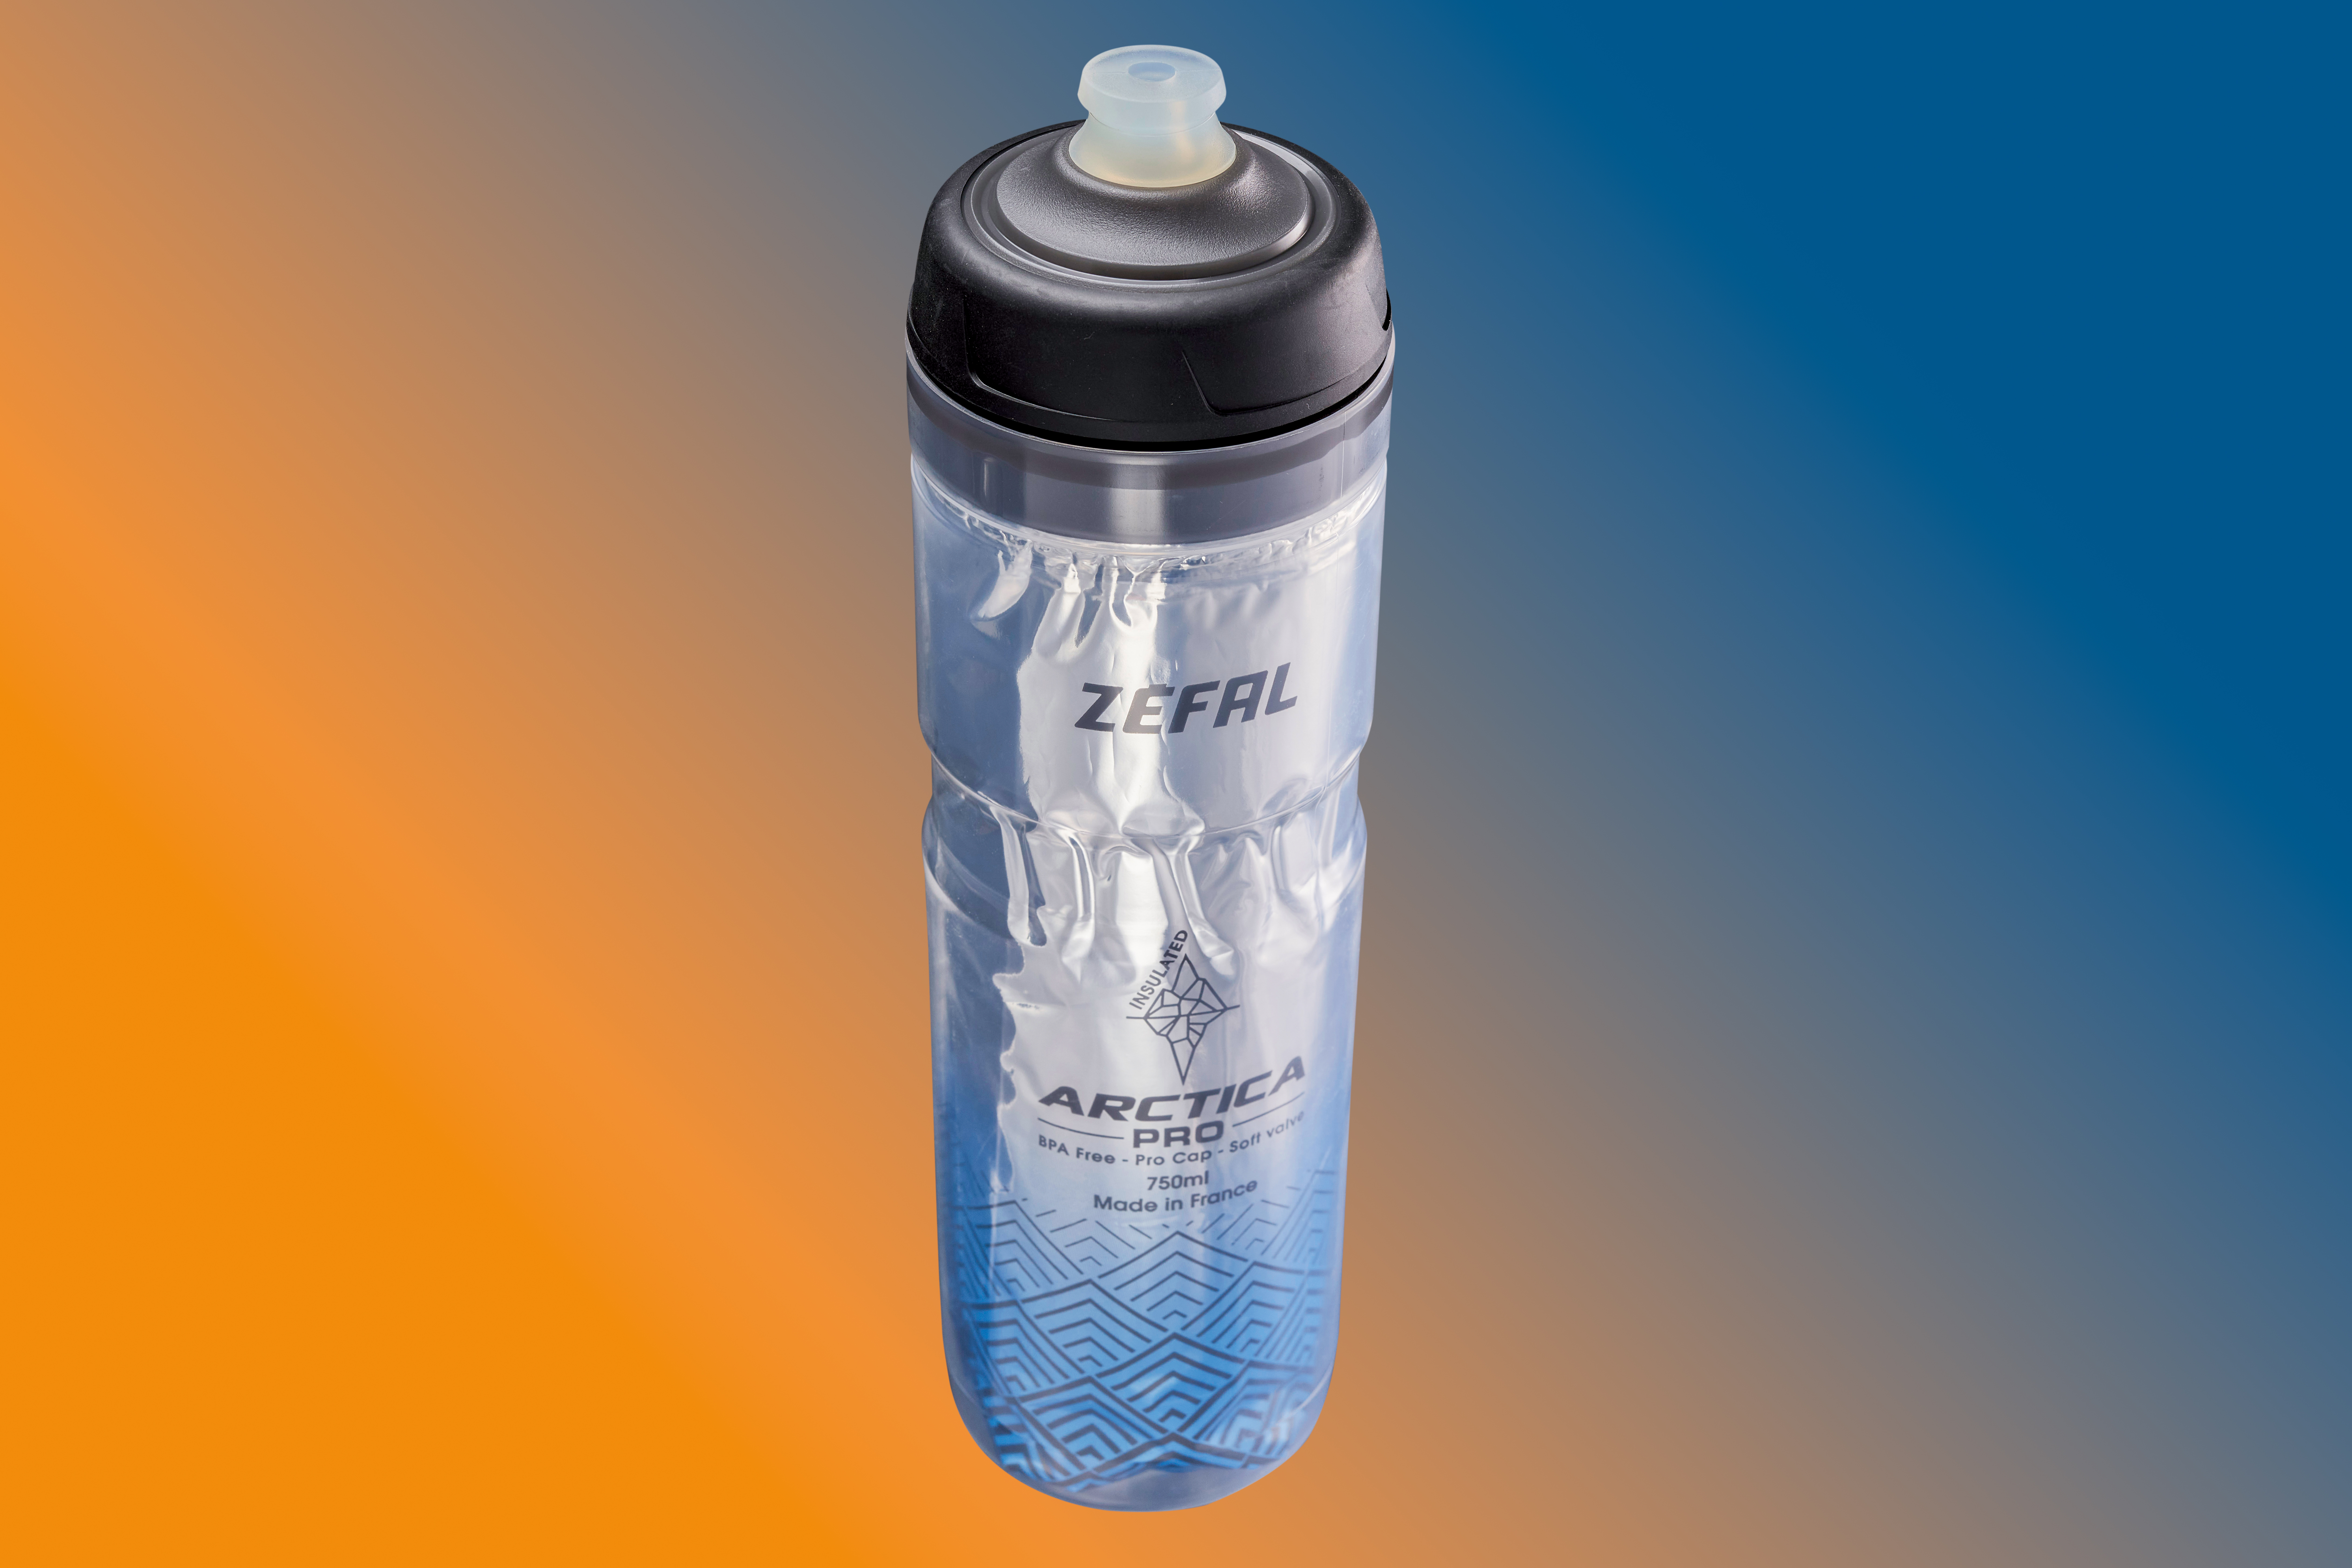 Best Insulated Water Bottles 2022 - For Ice, Cold, and Hot Water